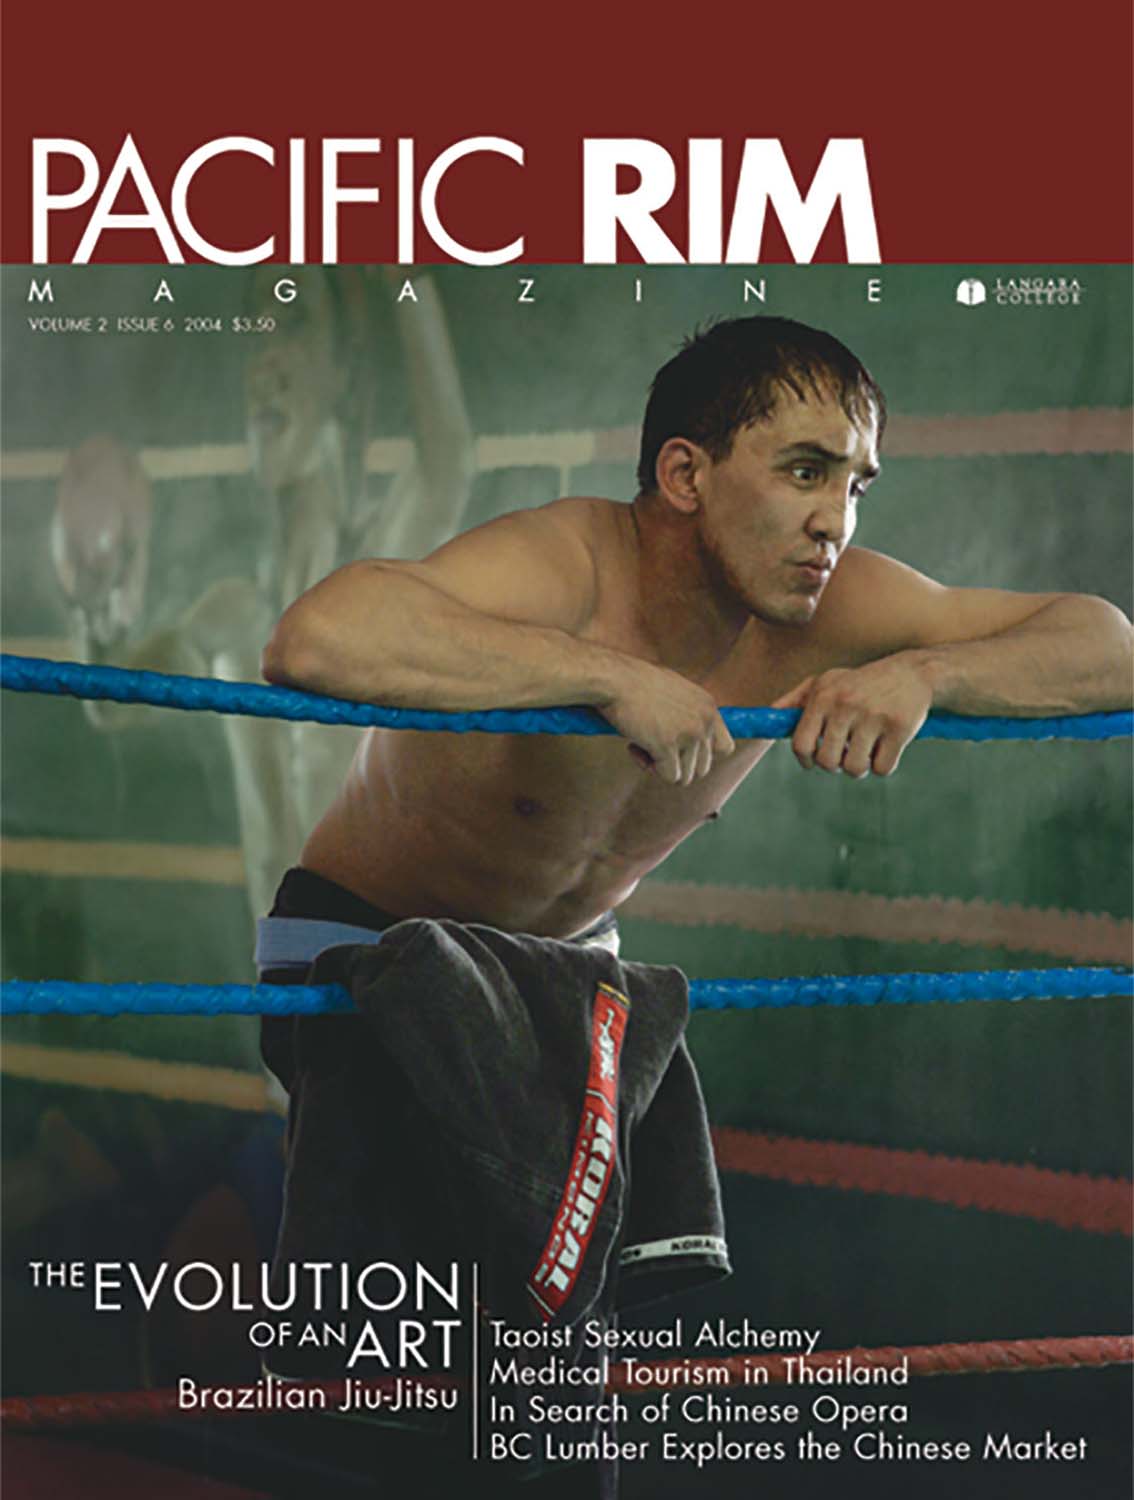 2004 Pacific Rim Cover. "The Evolution of an Art." Cover Story. Image of man in boxing ring.